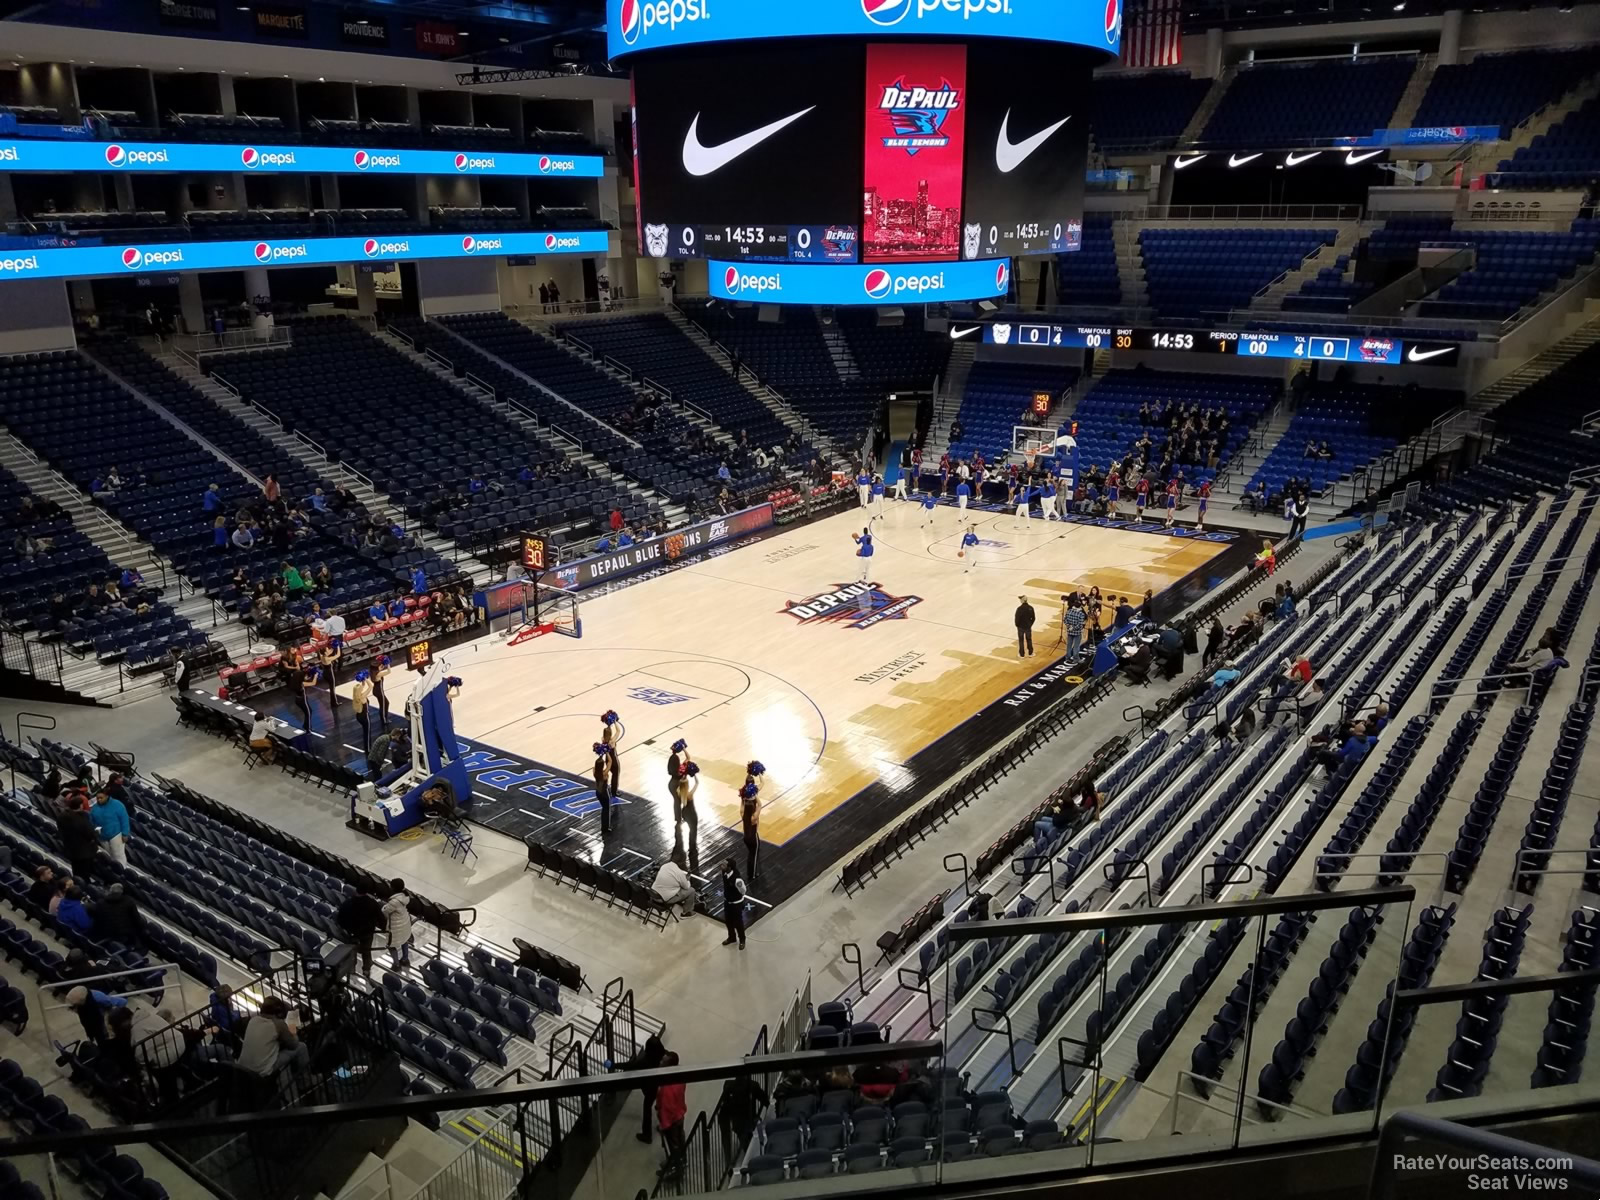 section 230, row c seat view  for basketball - wintrust arena